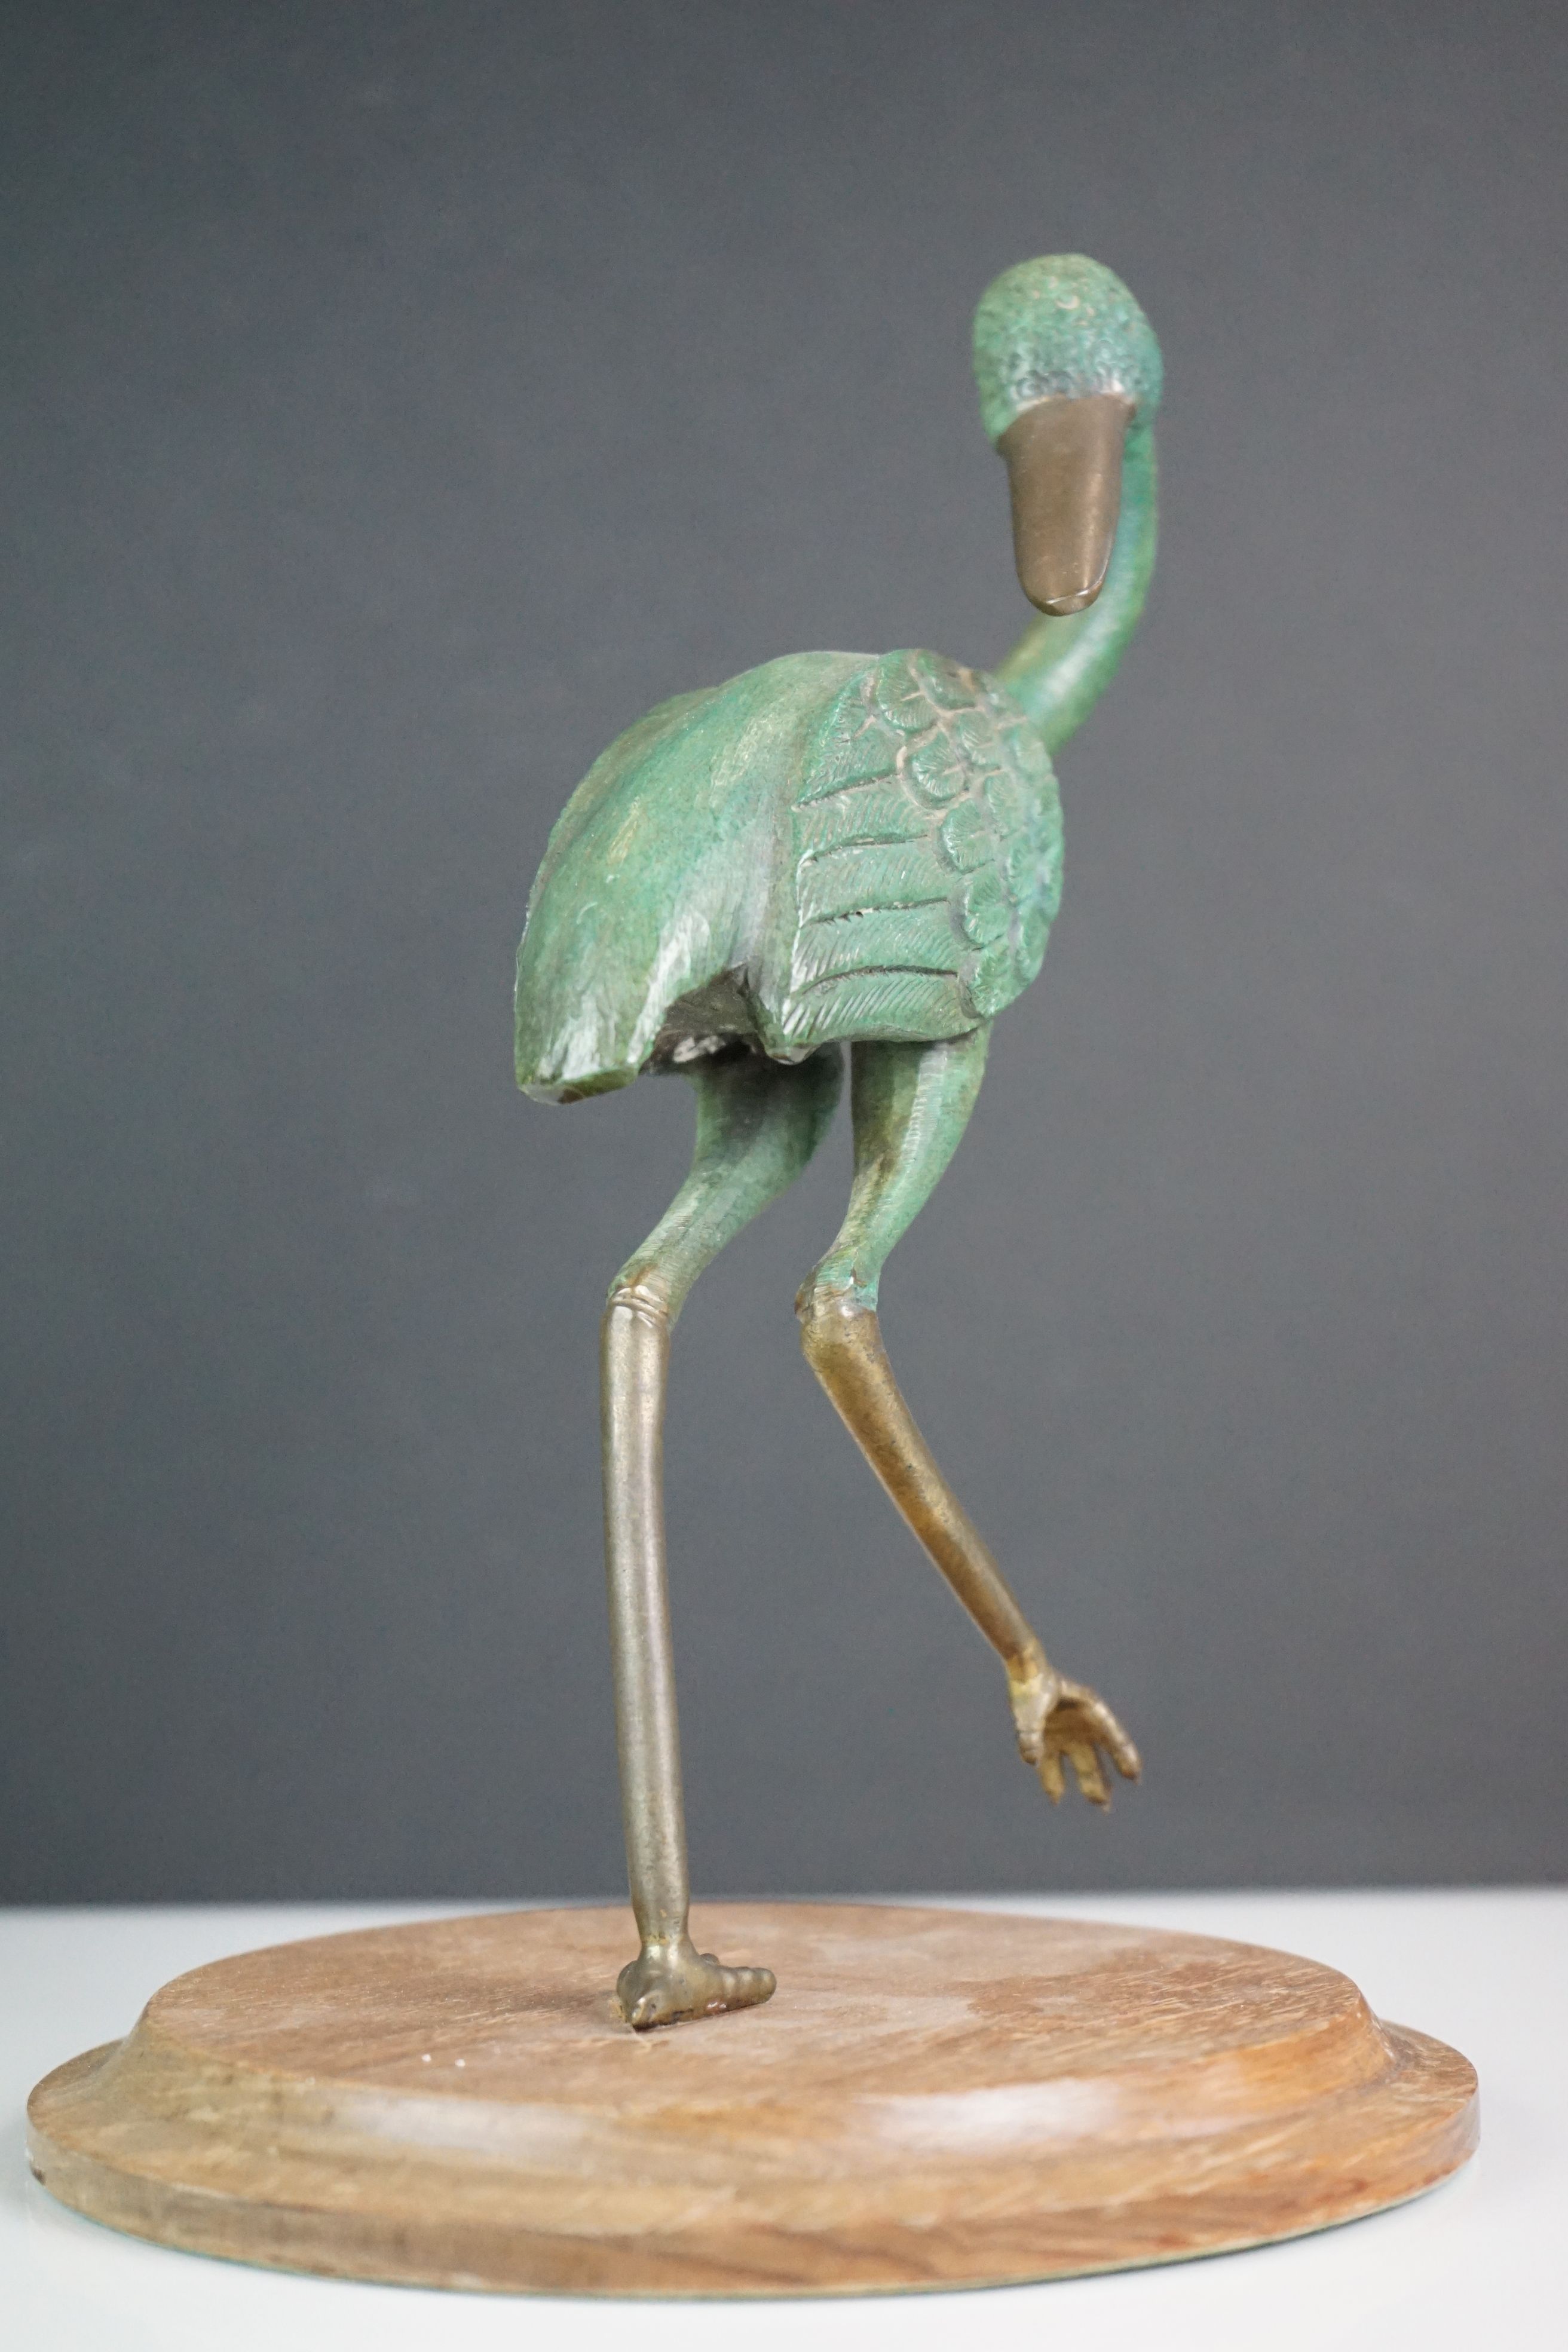 Painted sculpture of a bronze wader type bird, mounted on a wooden plinth - Image 2 of 4